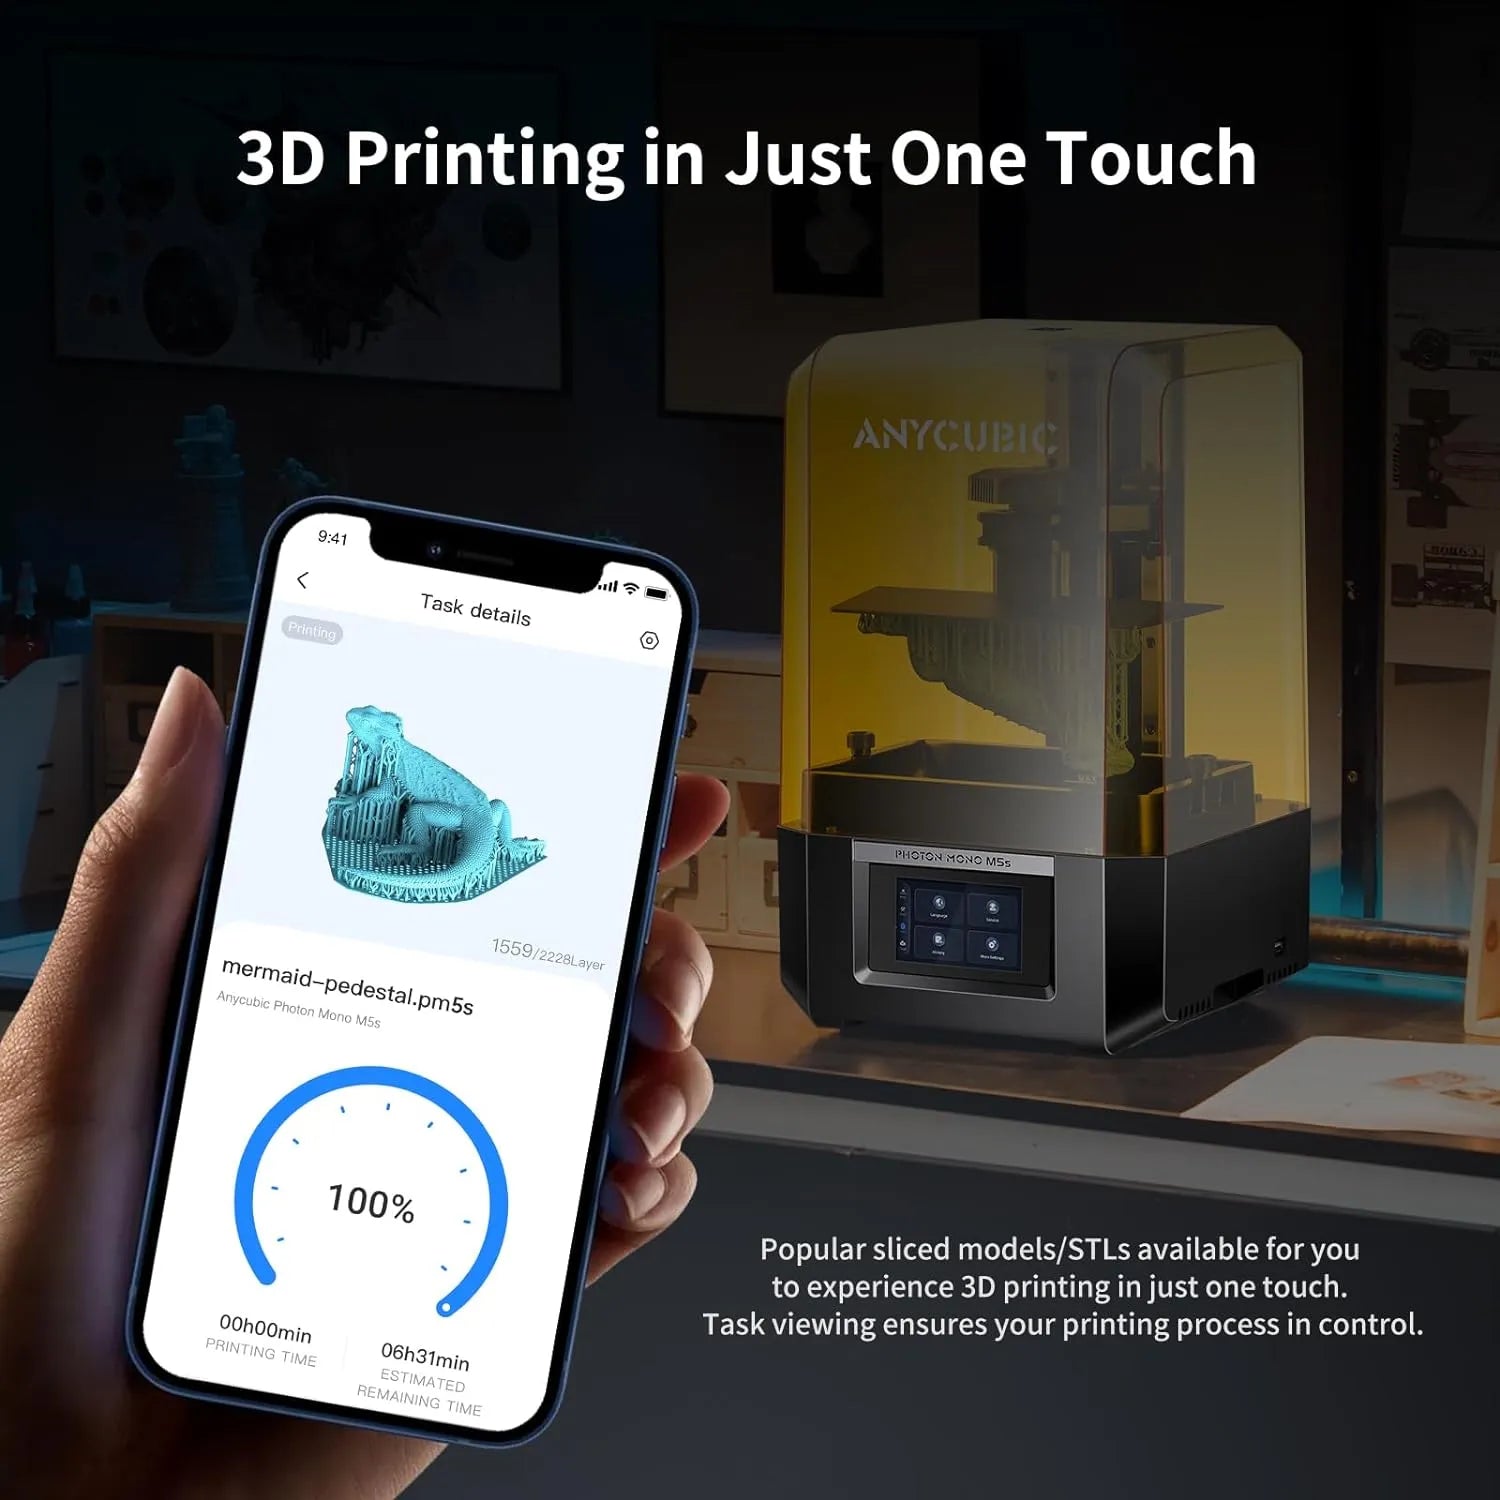 ANYCUBIC Photon Mono M5s 12K Resin 3D Printer with Smart Leveling-Free 10.1" Monochrome LCD Screen 3X Faster Smart Printing